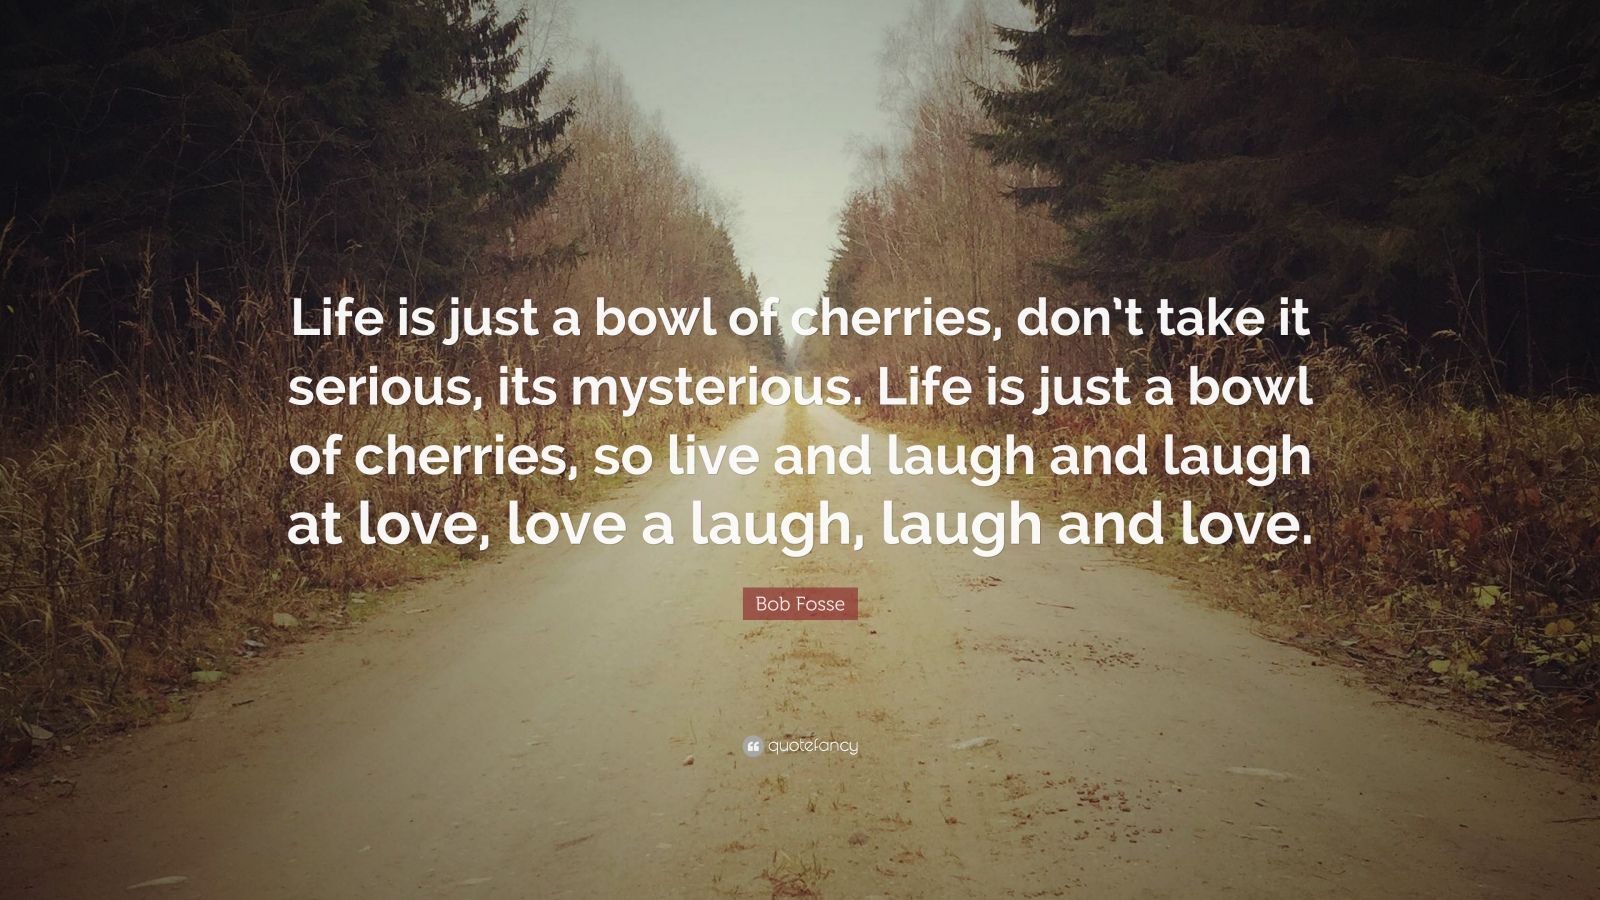 Bob Fosse Quote: “Life is just a bowl of cherries, don’t take it ...